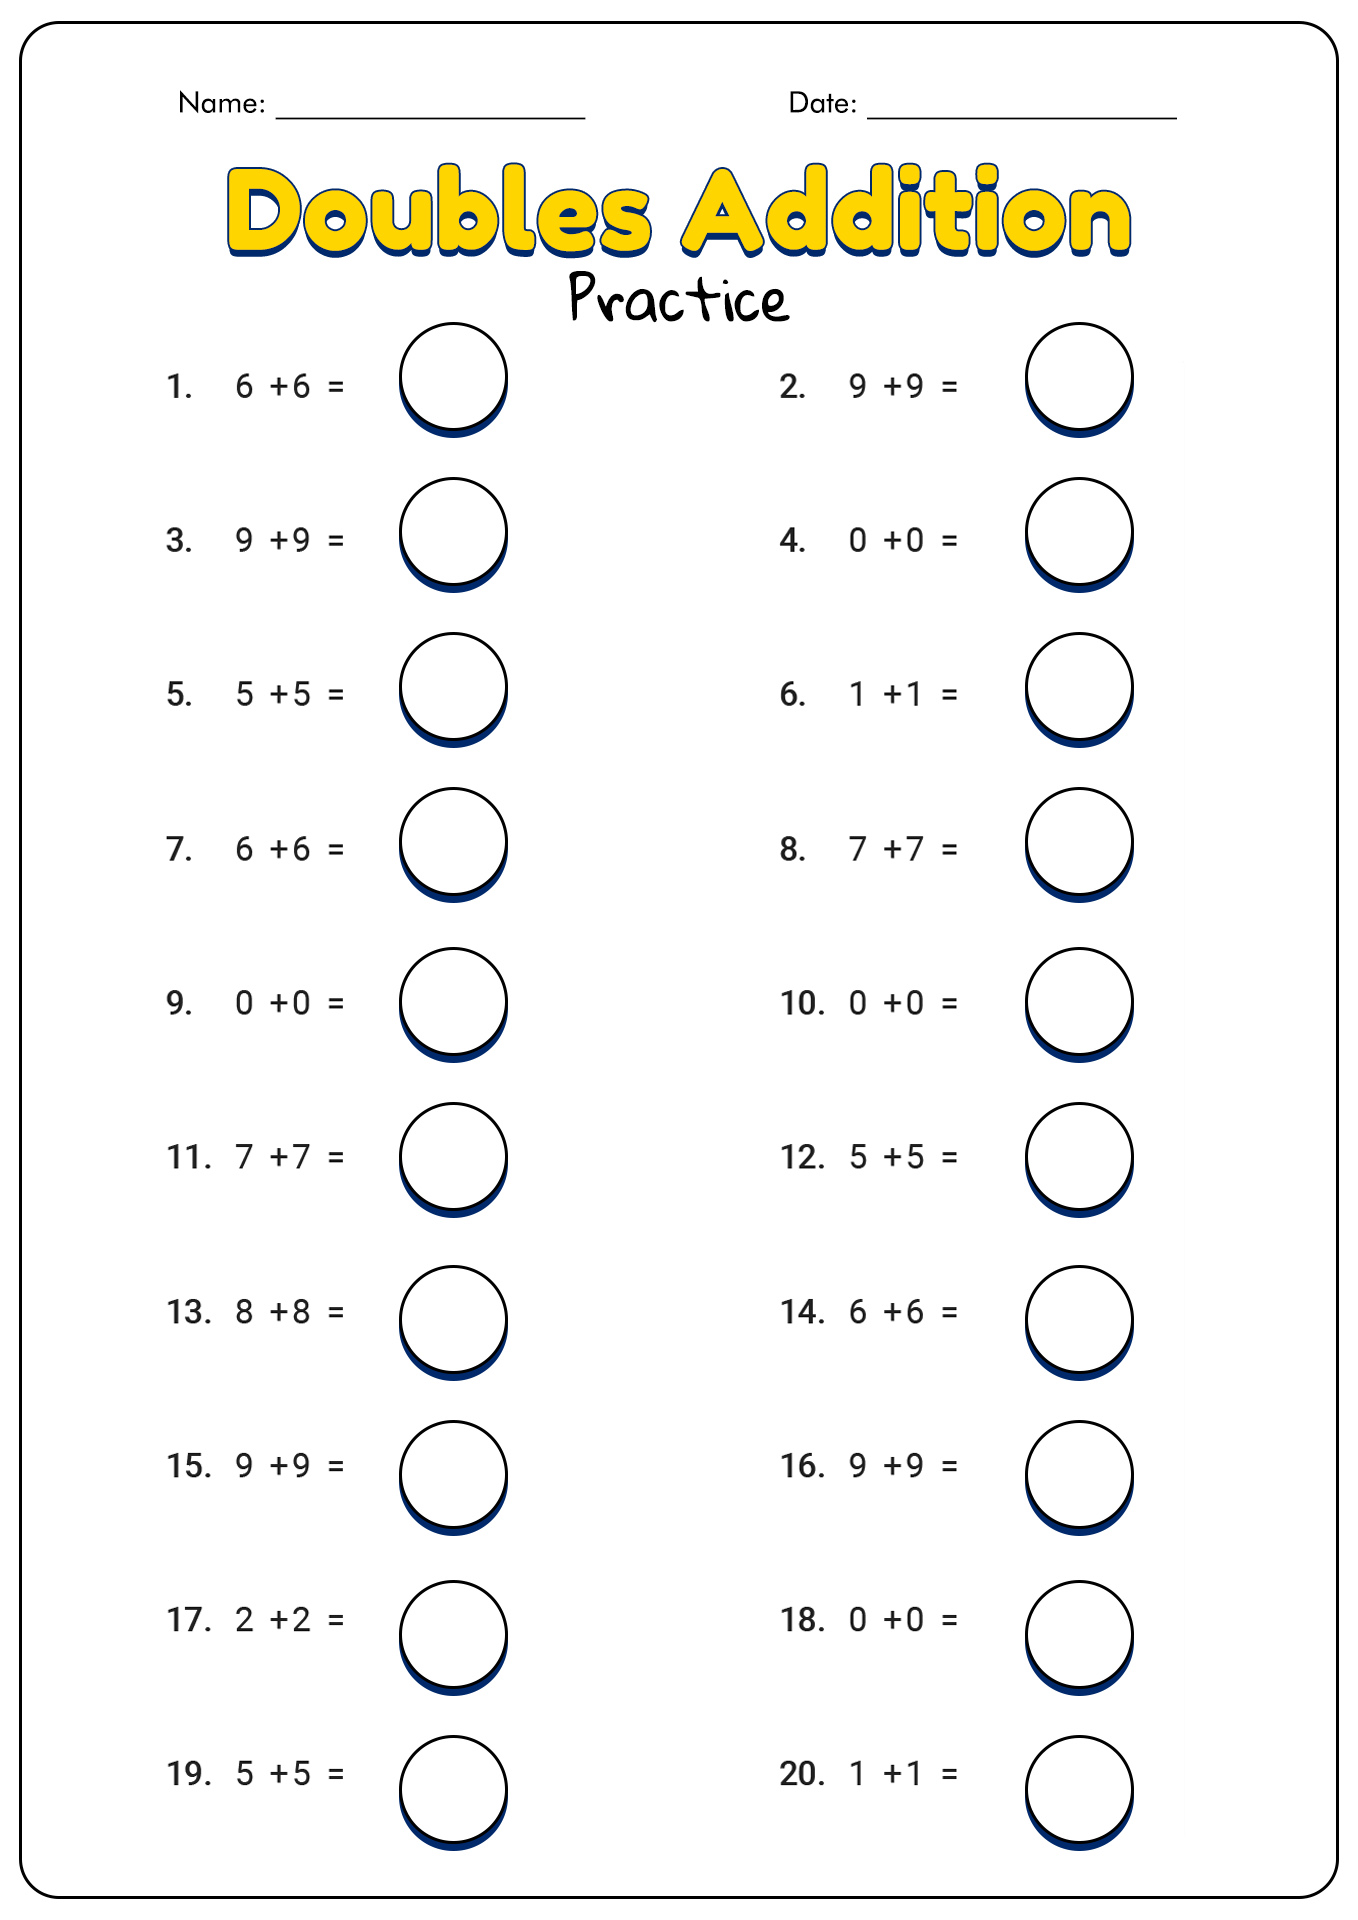 Doubles Addition Practice